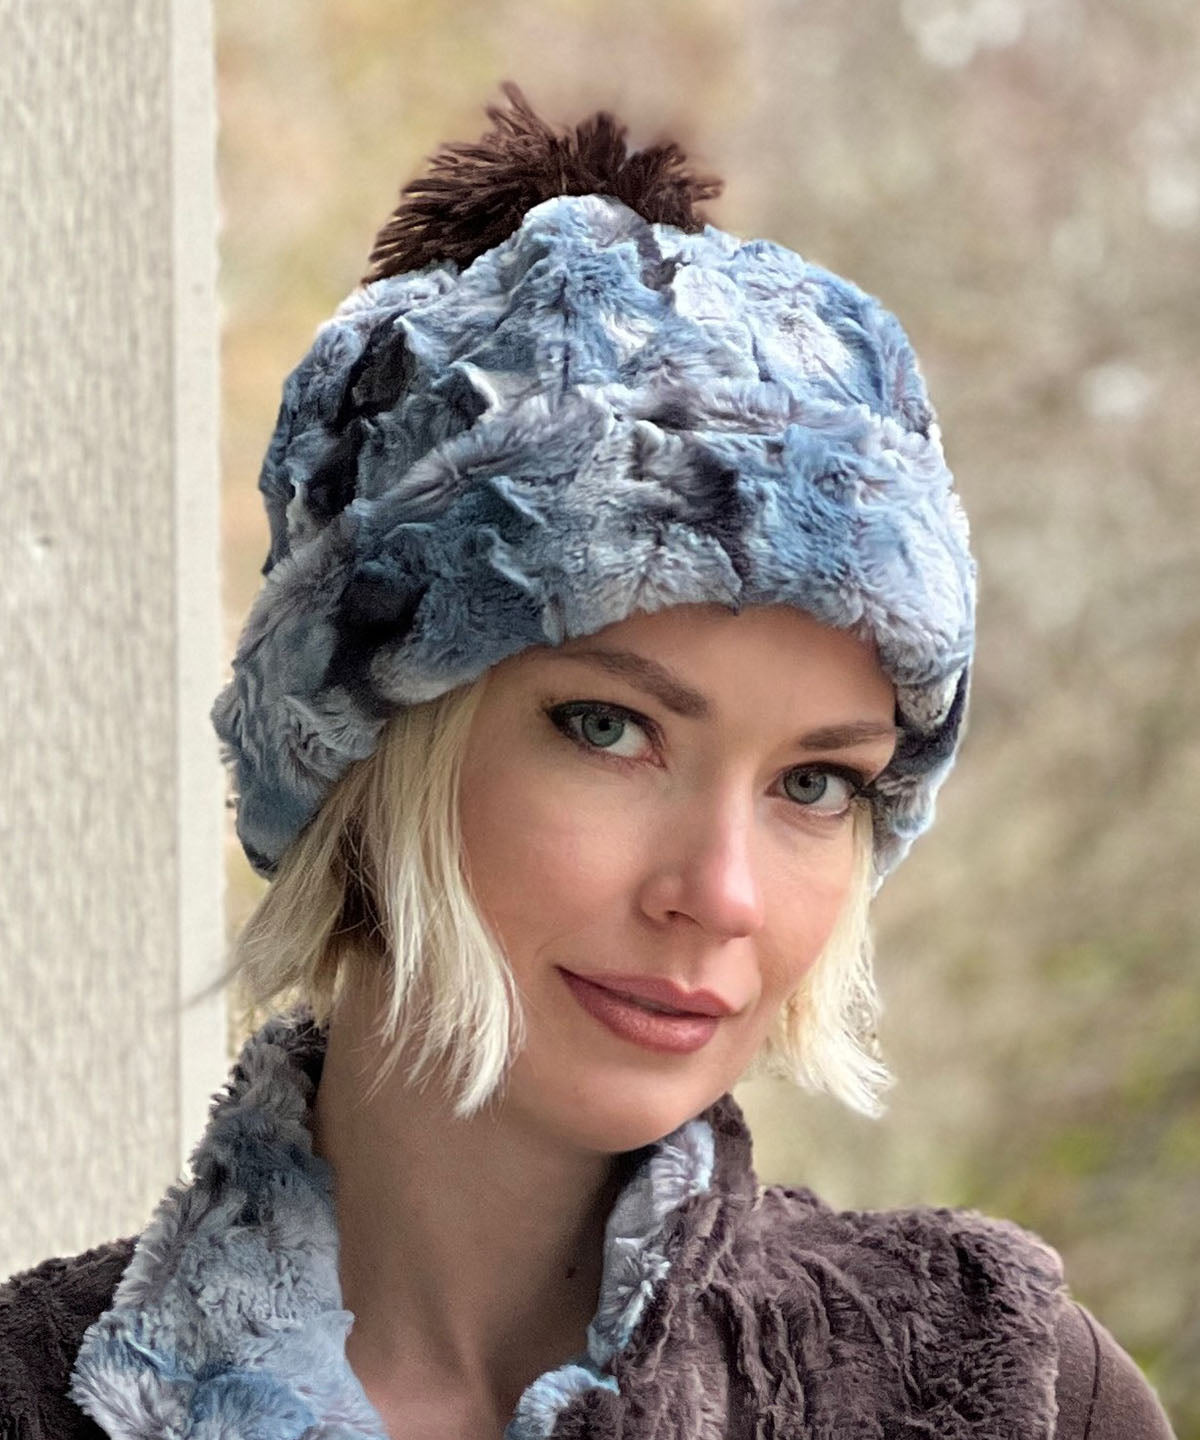  Women's Reversible Beanie with Pom Pom on model | Cascade in Rainer Sky, Blue, Cream and Brown Faux Fur with Espresso | Handmade USA by Pandemonium Seattle